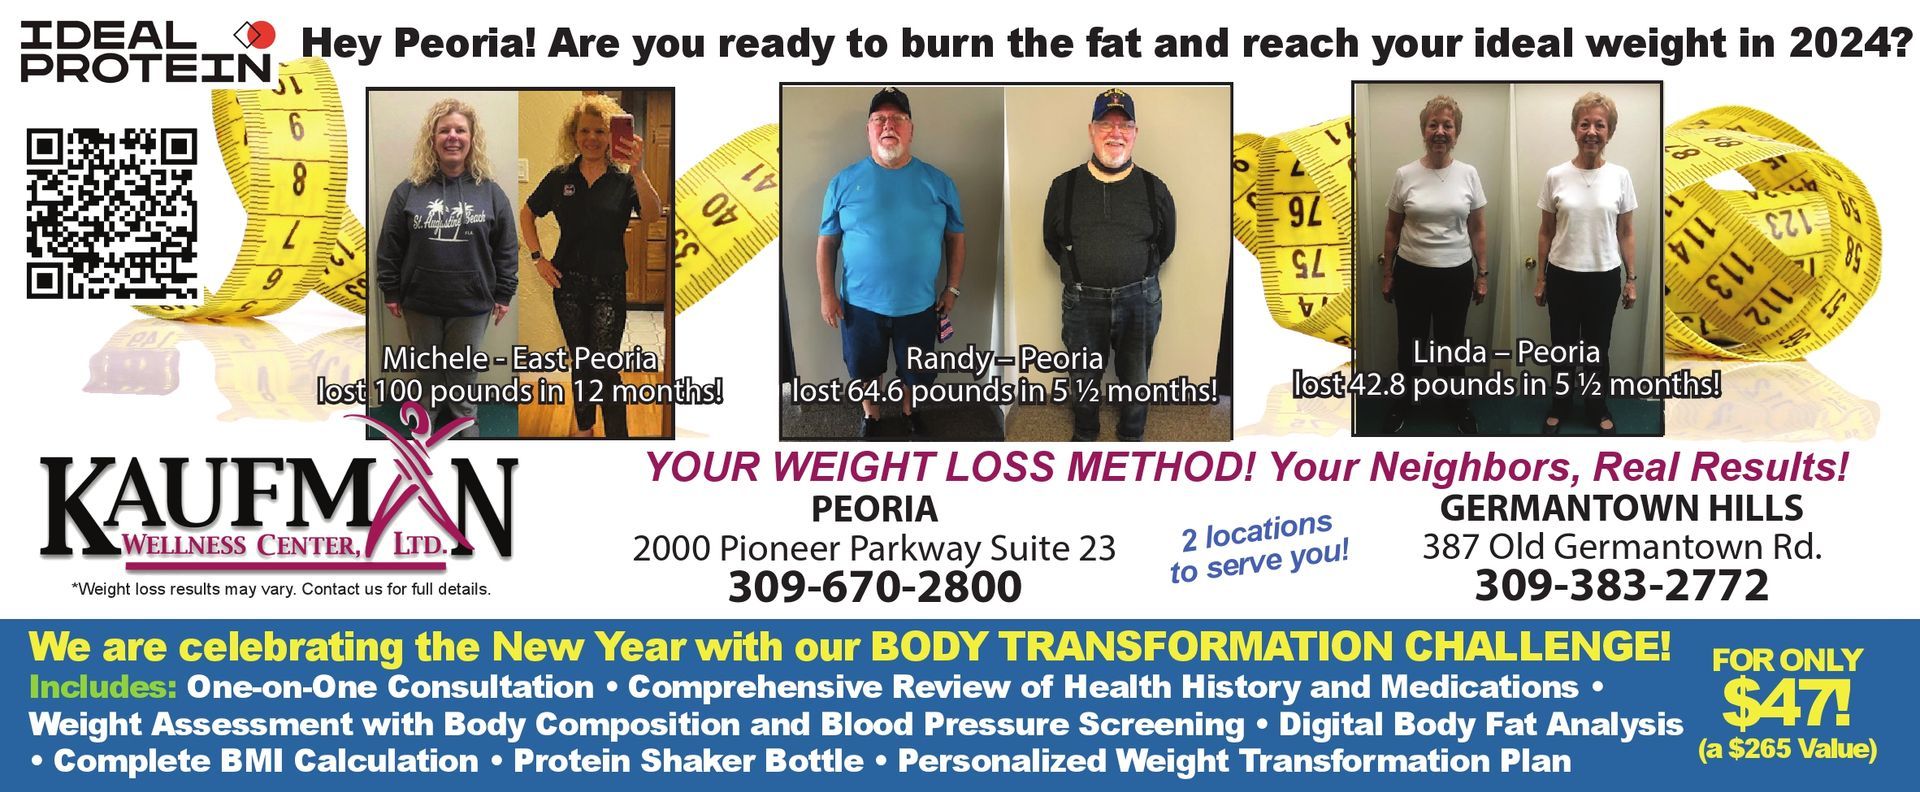 Kaufman Wellness Center, Dr, Kaufman and Dr. Hendricks, special coupon for Medically supervised weight loss program, Ideal Protein Weight Loss Method Program, Peoria and Germantown Hills, IL